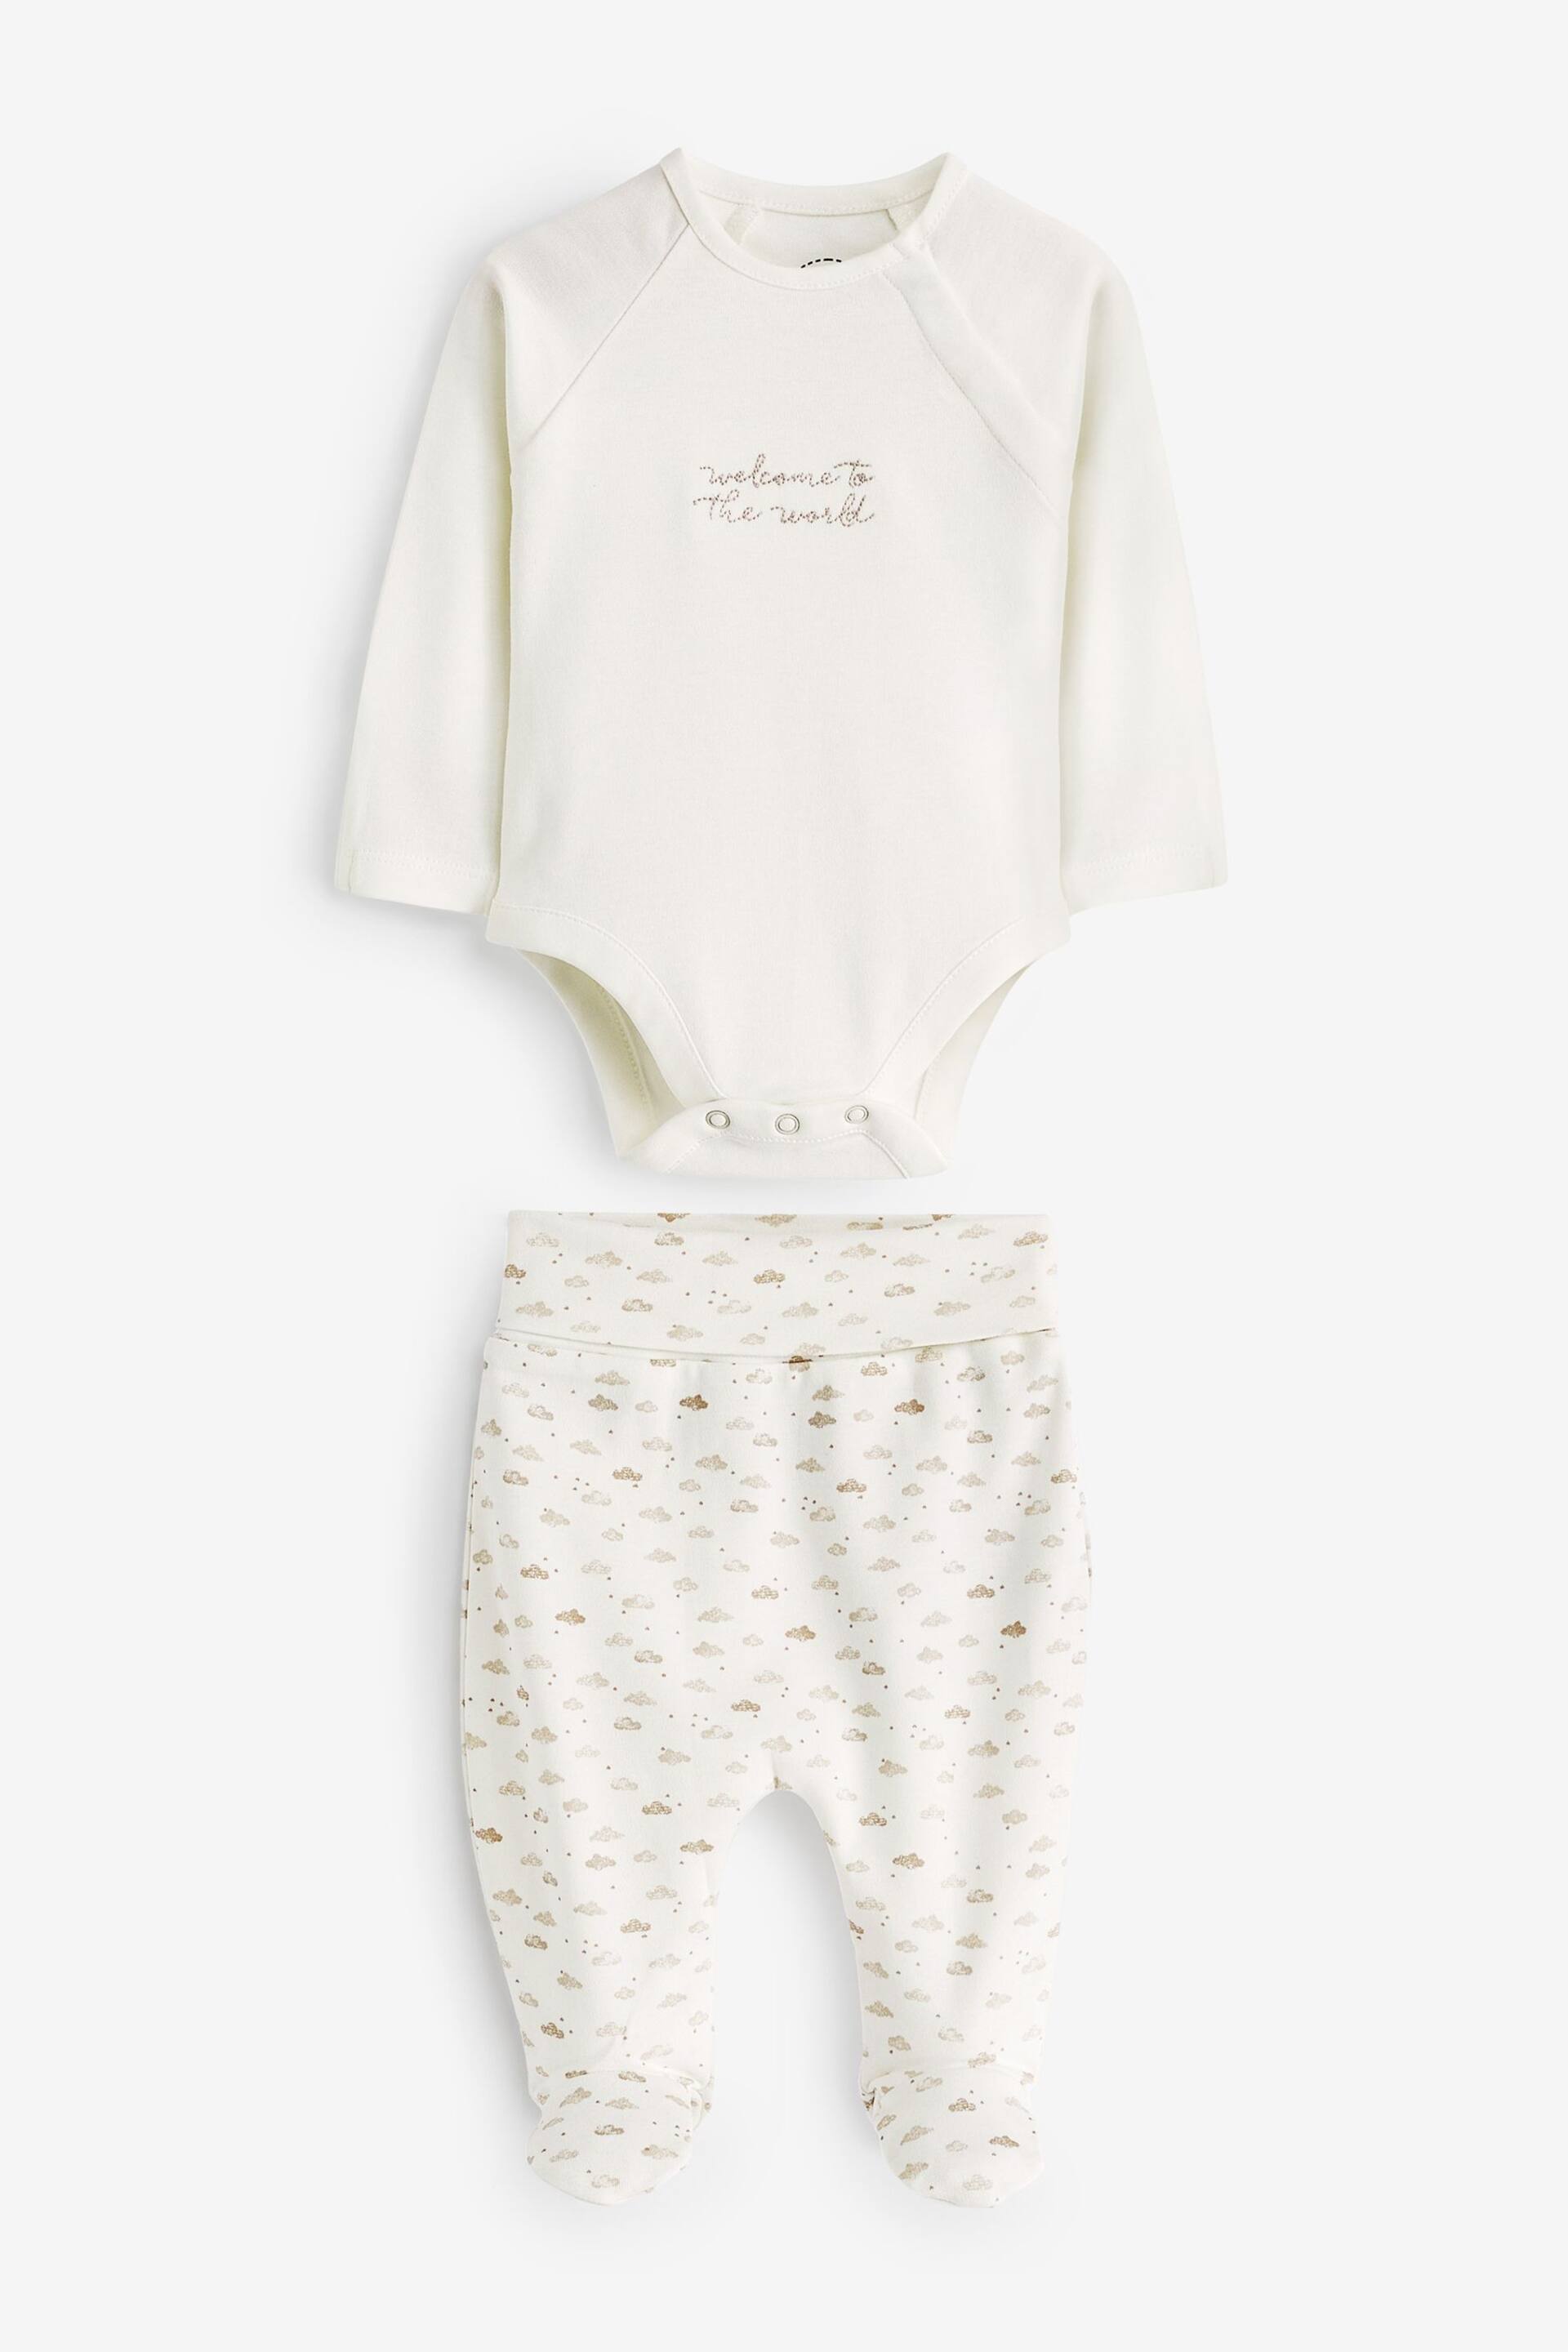 Mamas & Papas Cream 2 Piece Welcome To The World Bodysuit And Legging Set - Image 1 of 3